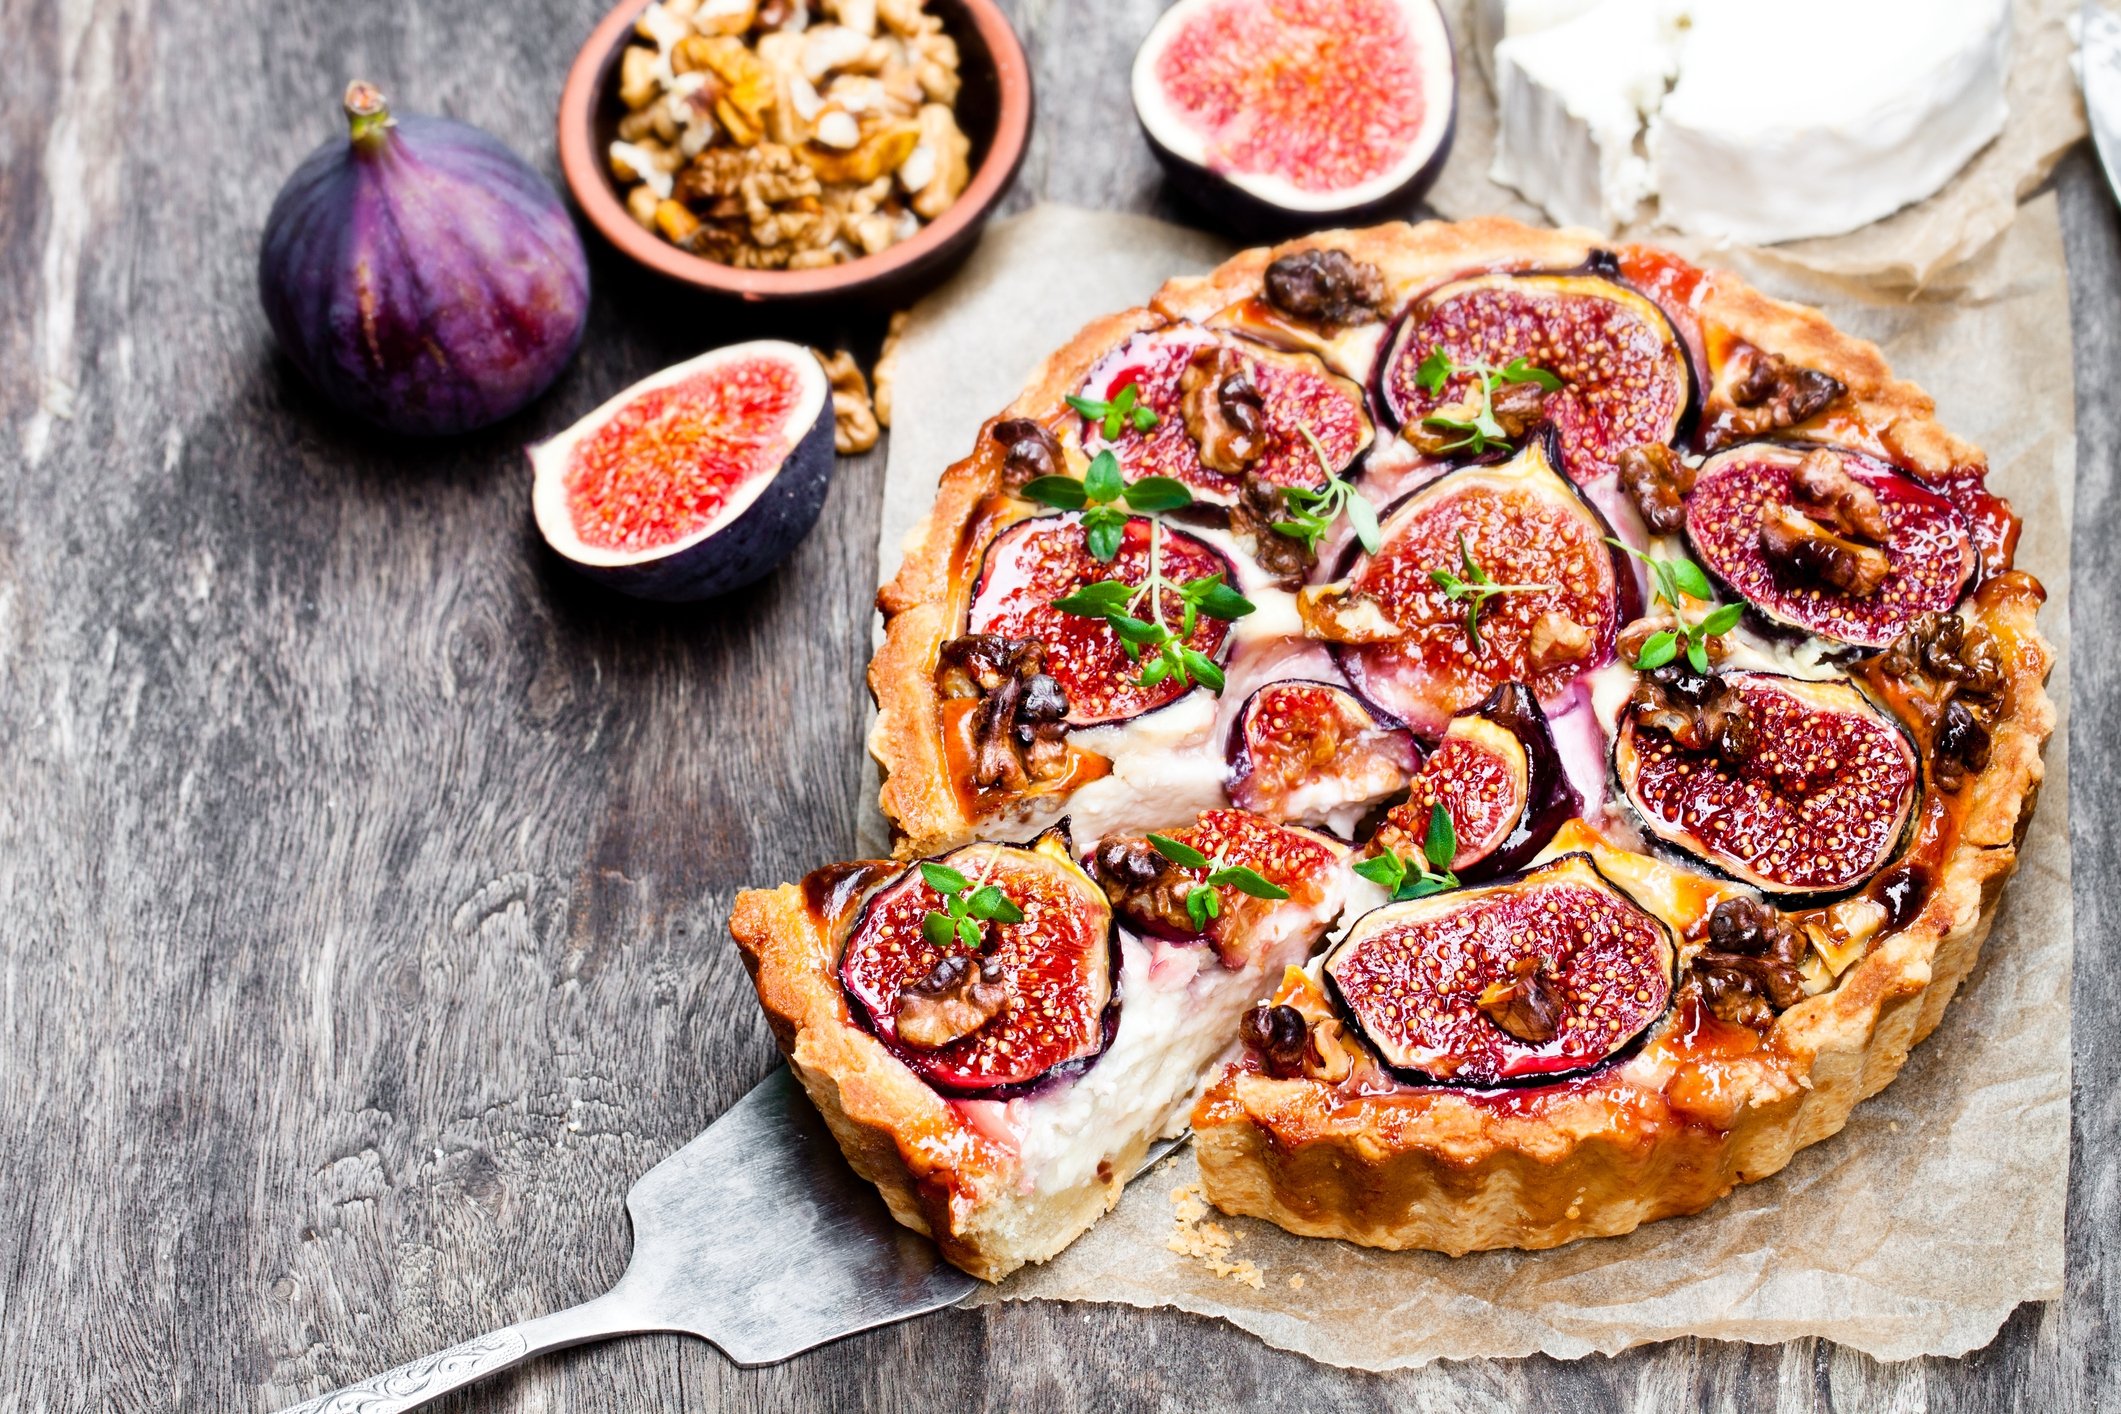 If pizza is not up your street, try topping off a goat cheese tart with some fresh figs. (iStock Photo)